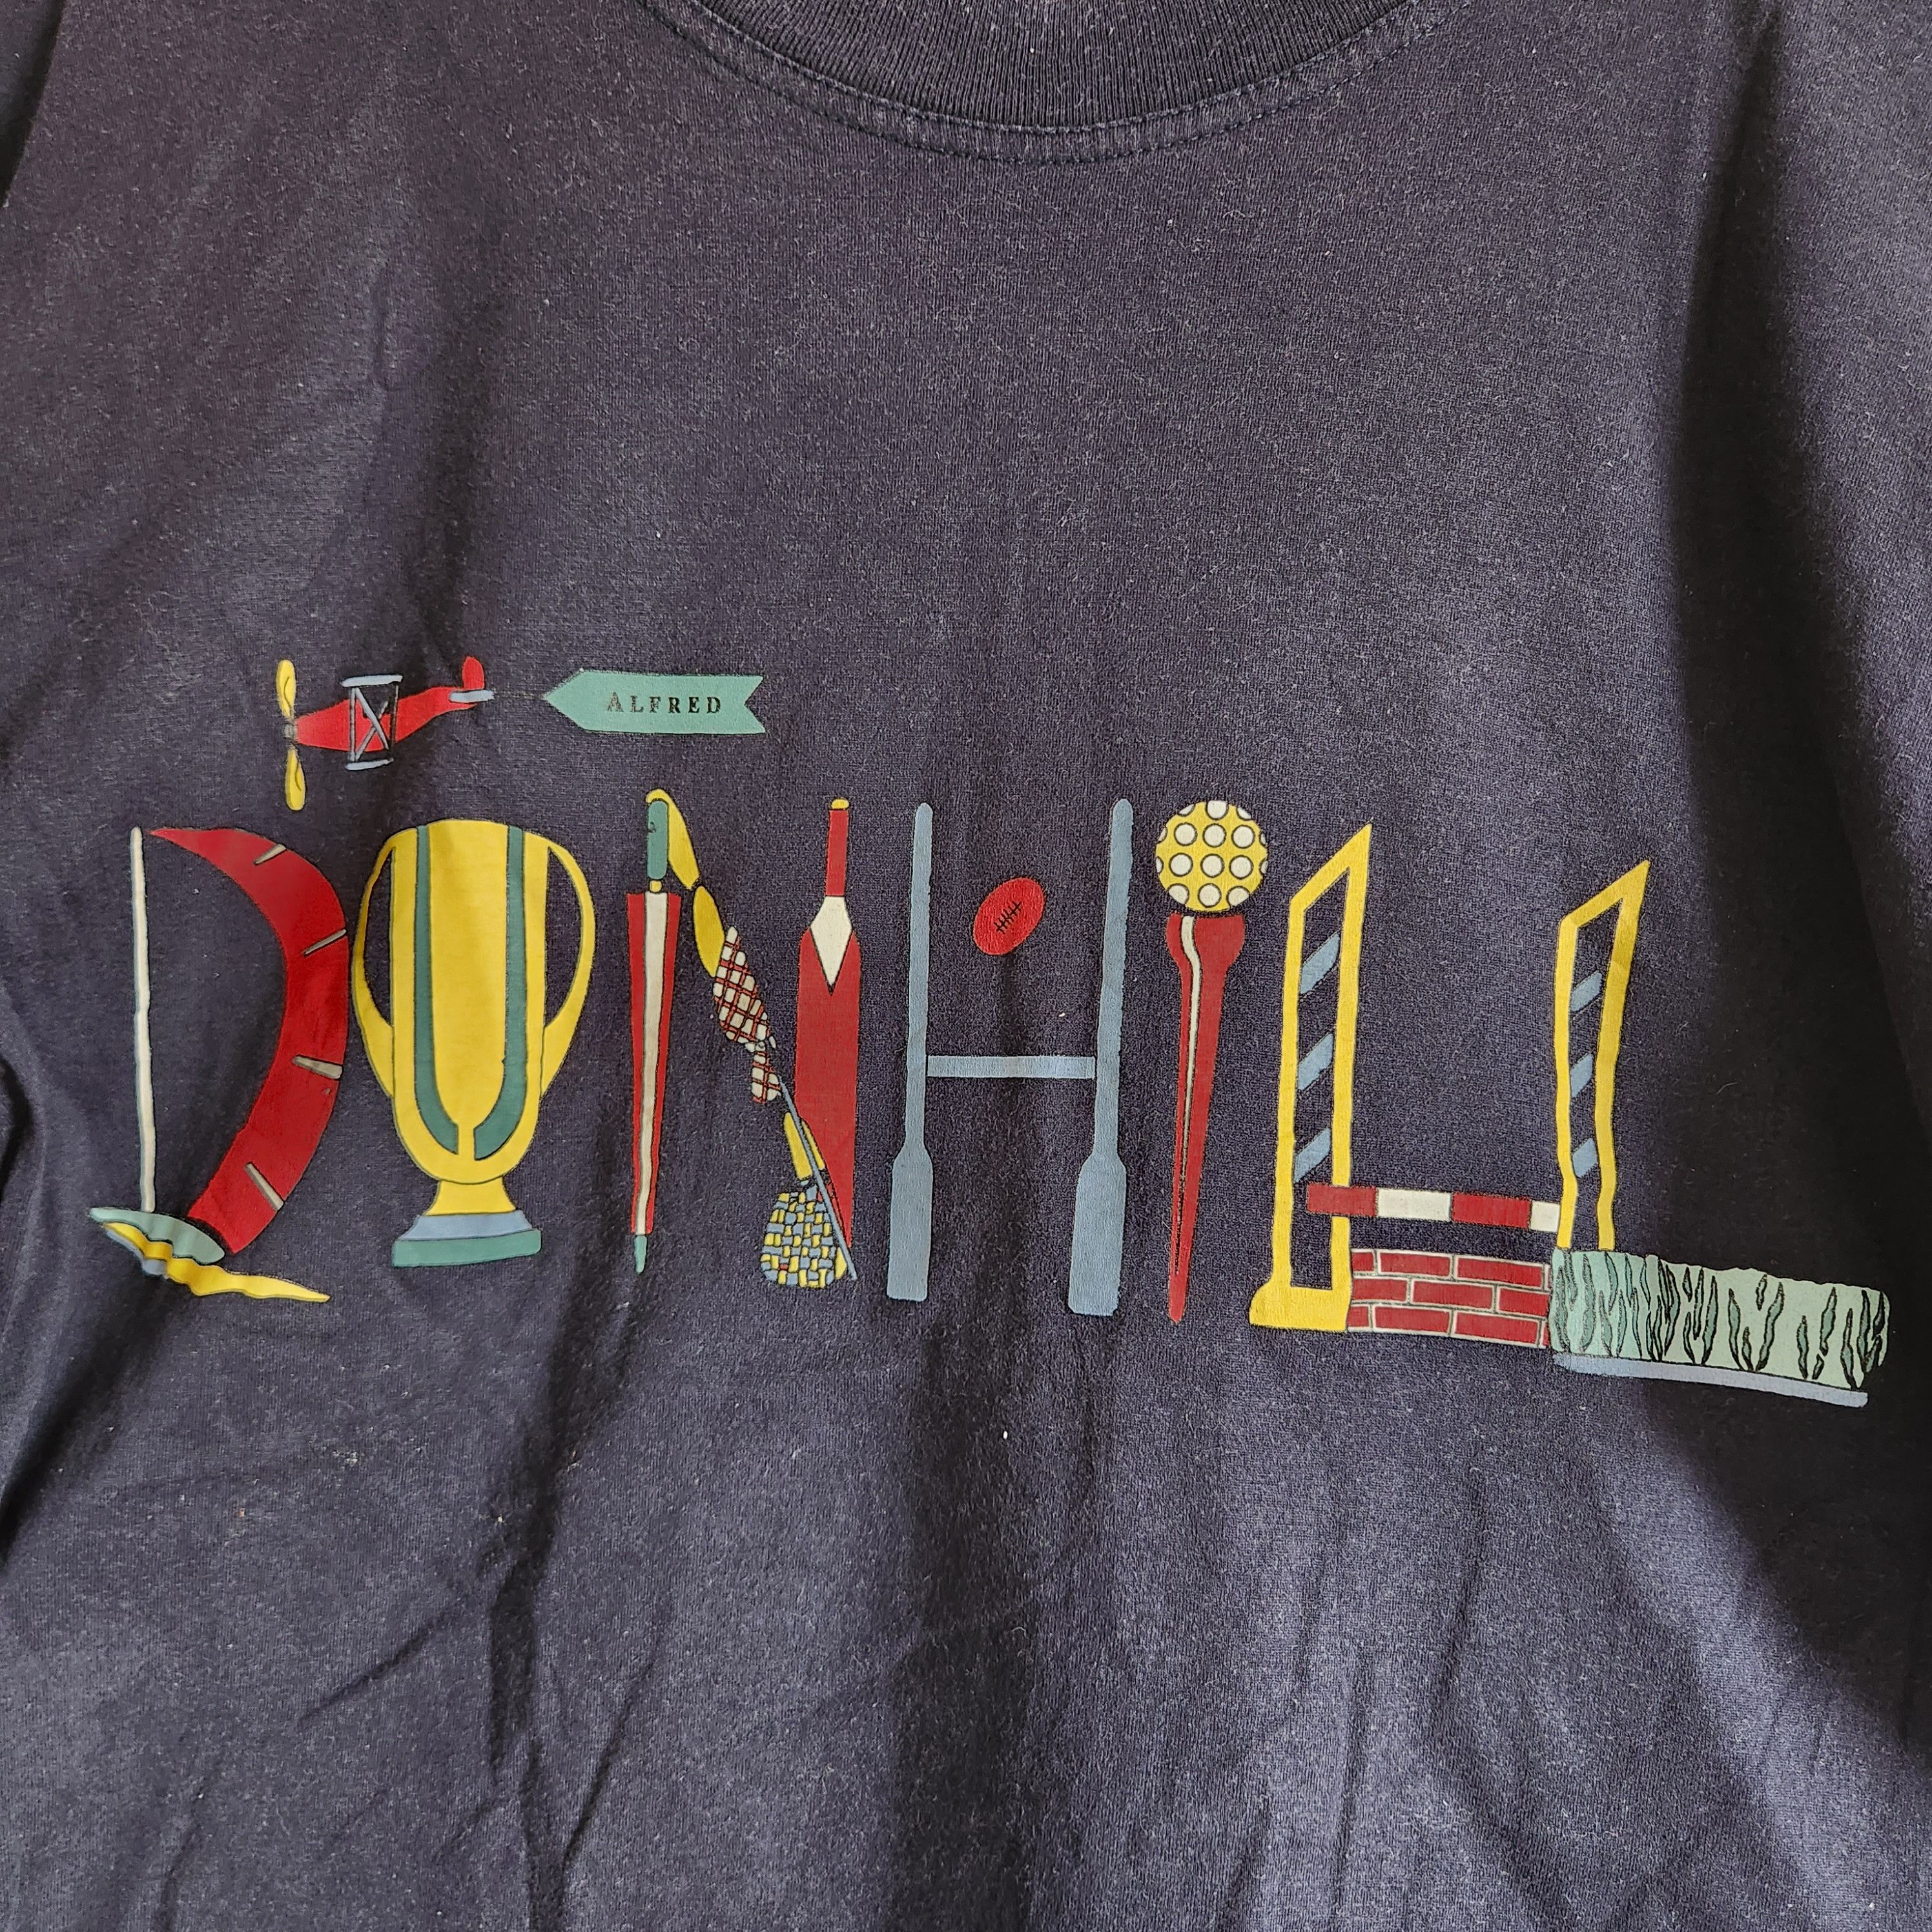 Vintage 1980s Alfred Dunhill TShirt Single Stitches - 6